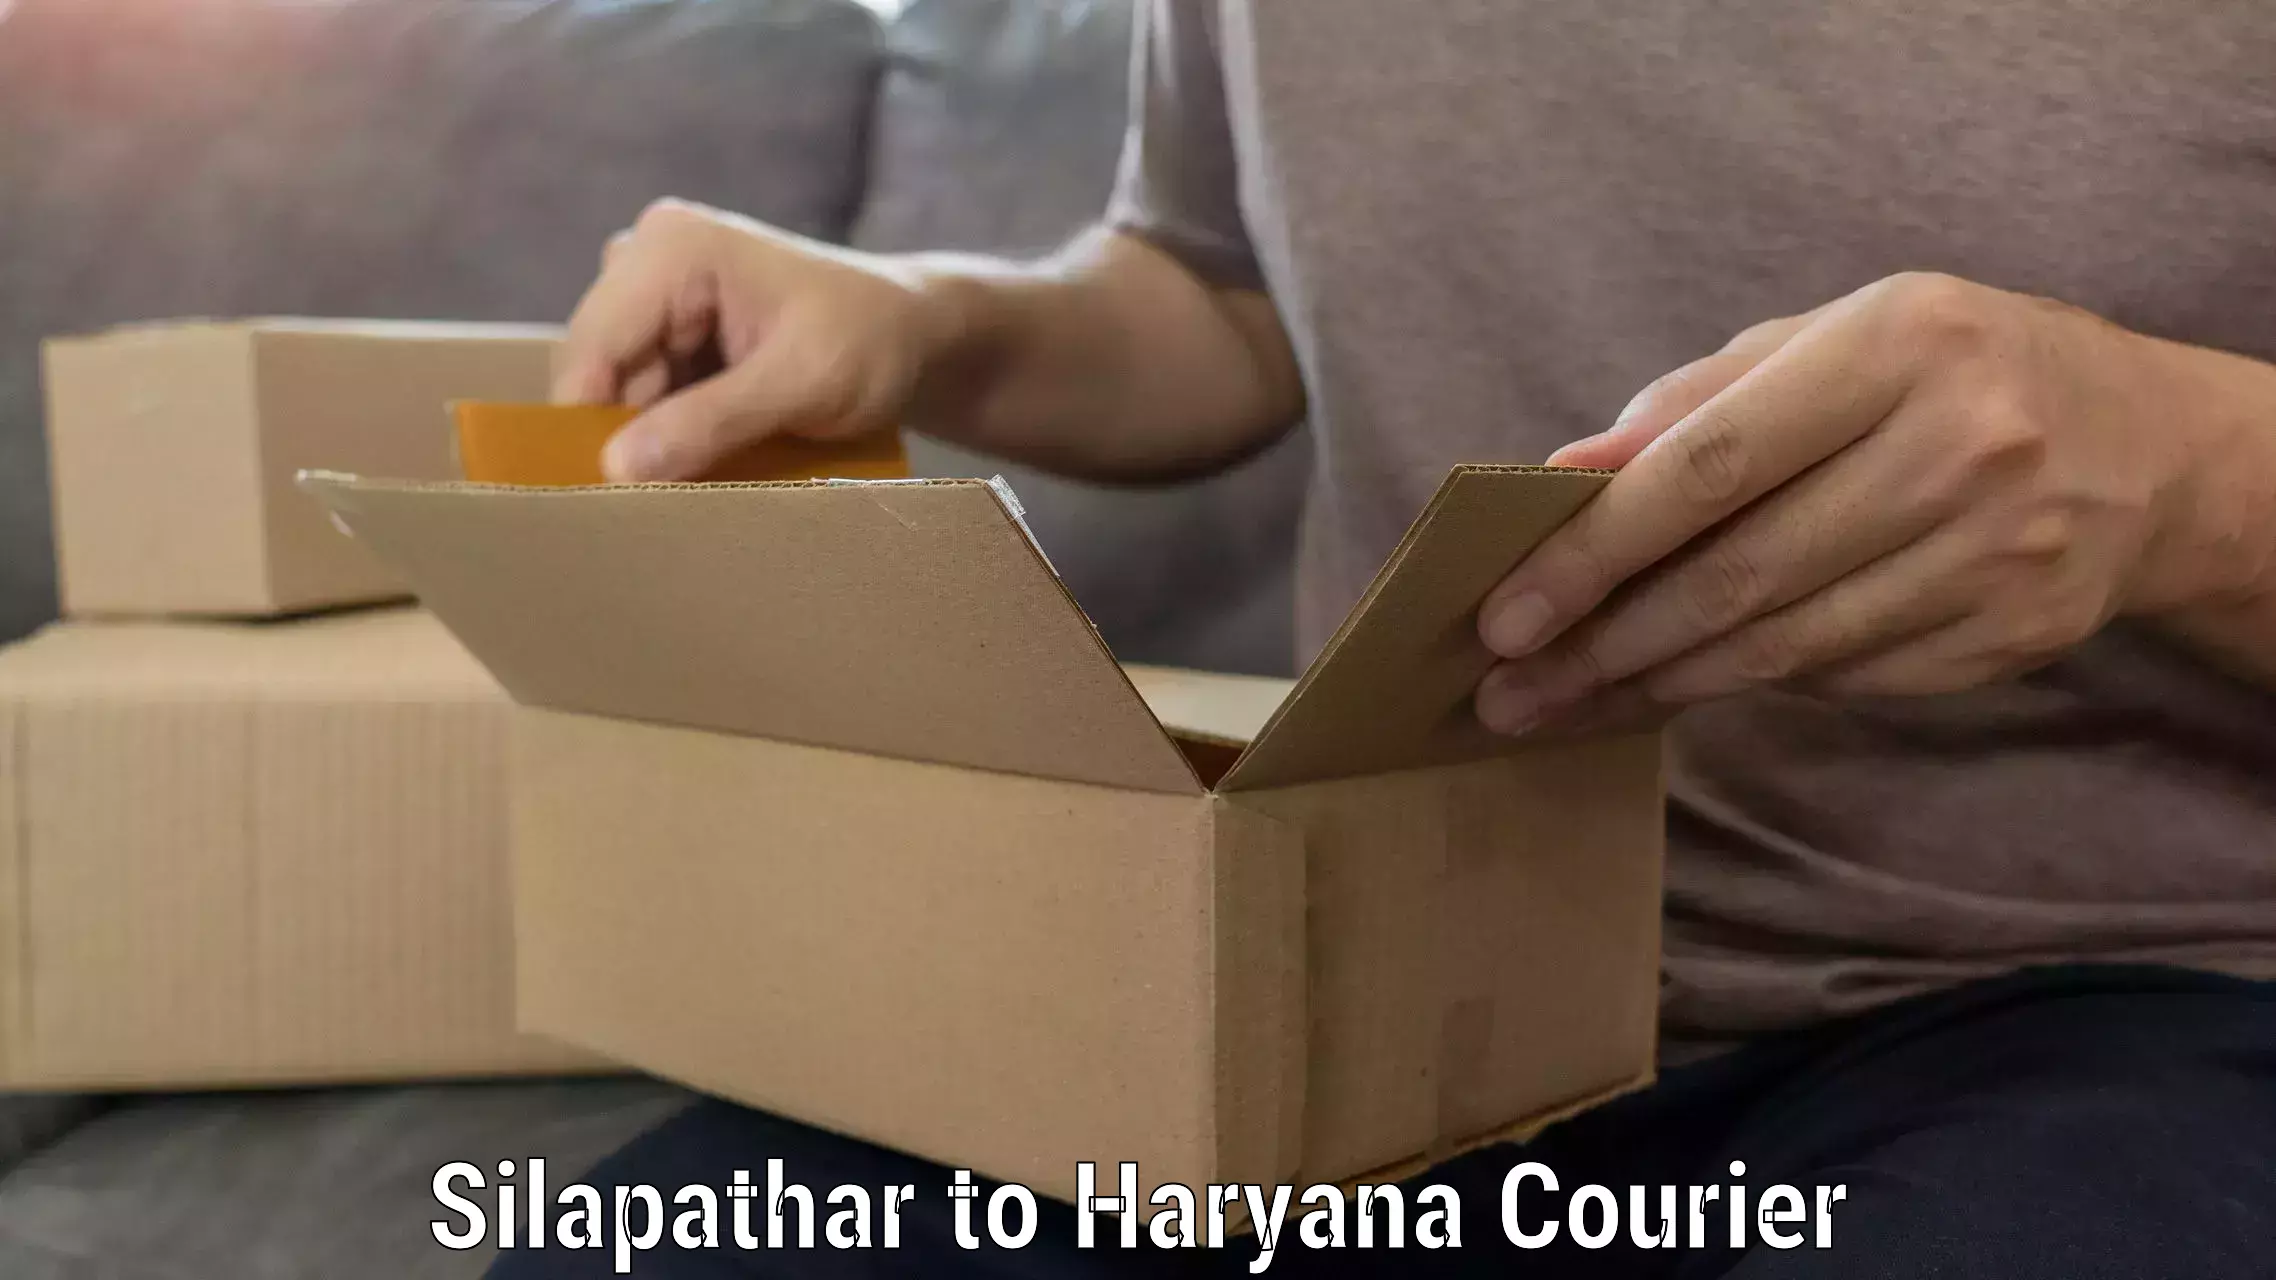 Furniture delivery service Silapathar to Bilaspur Haryana